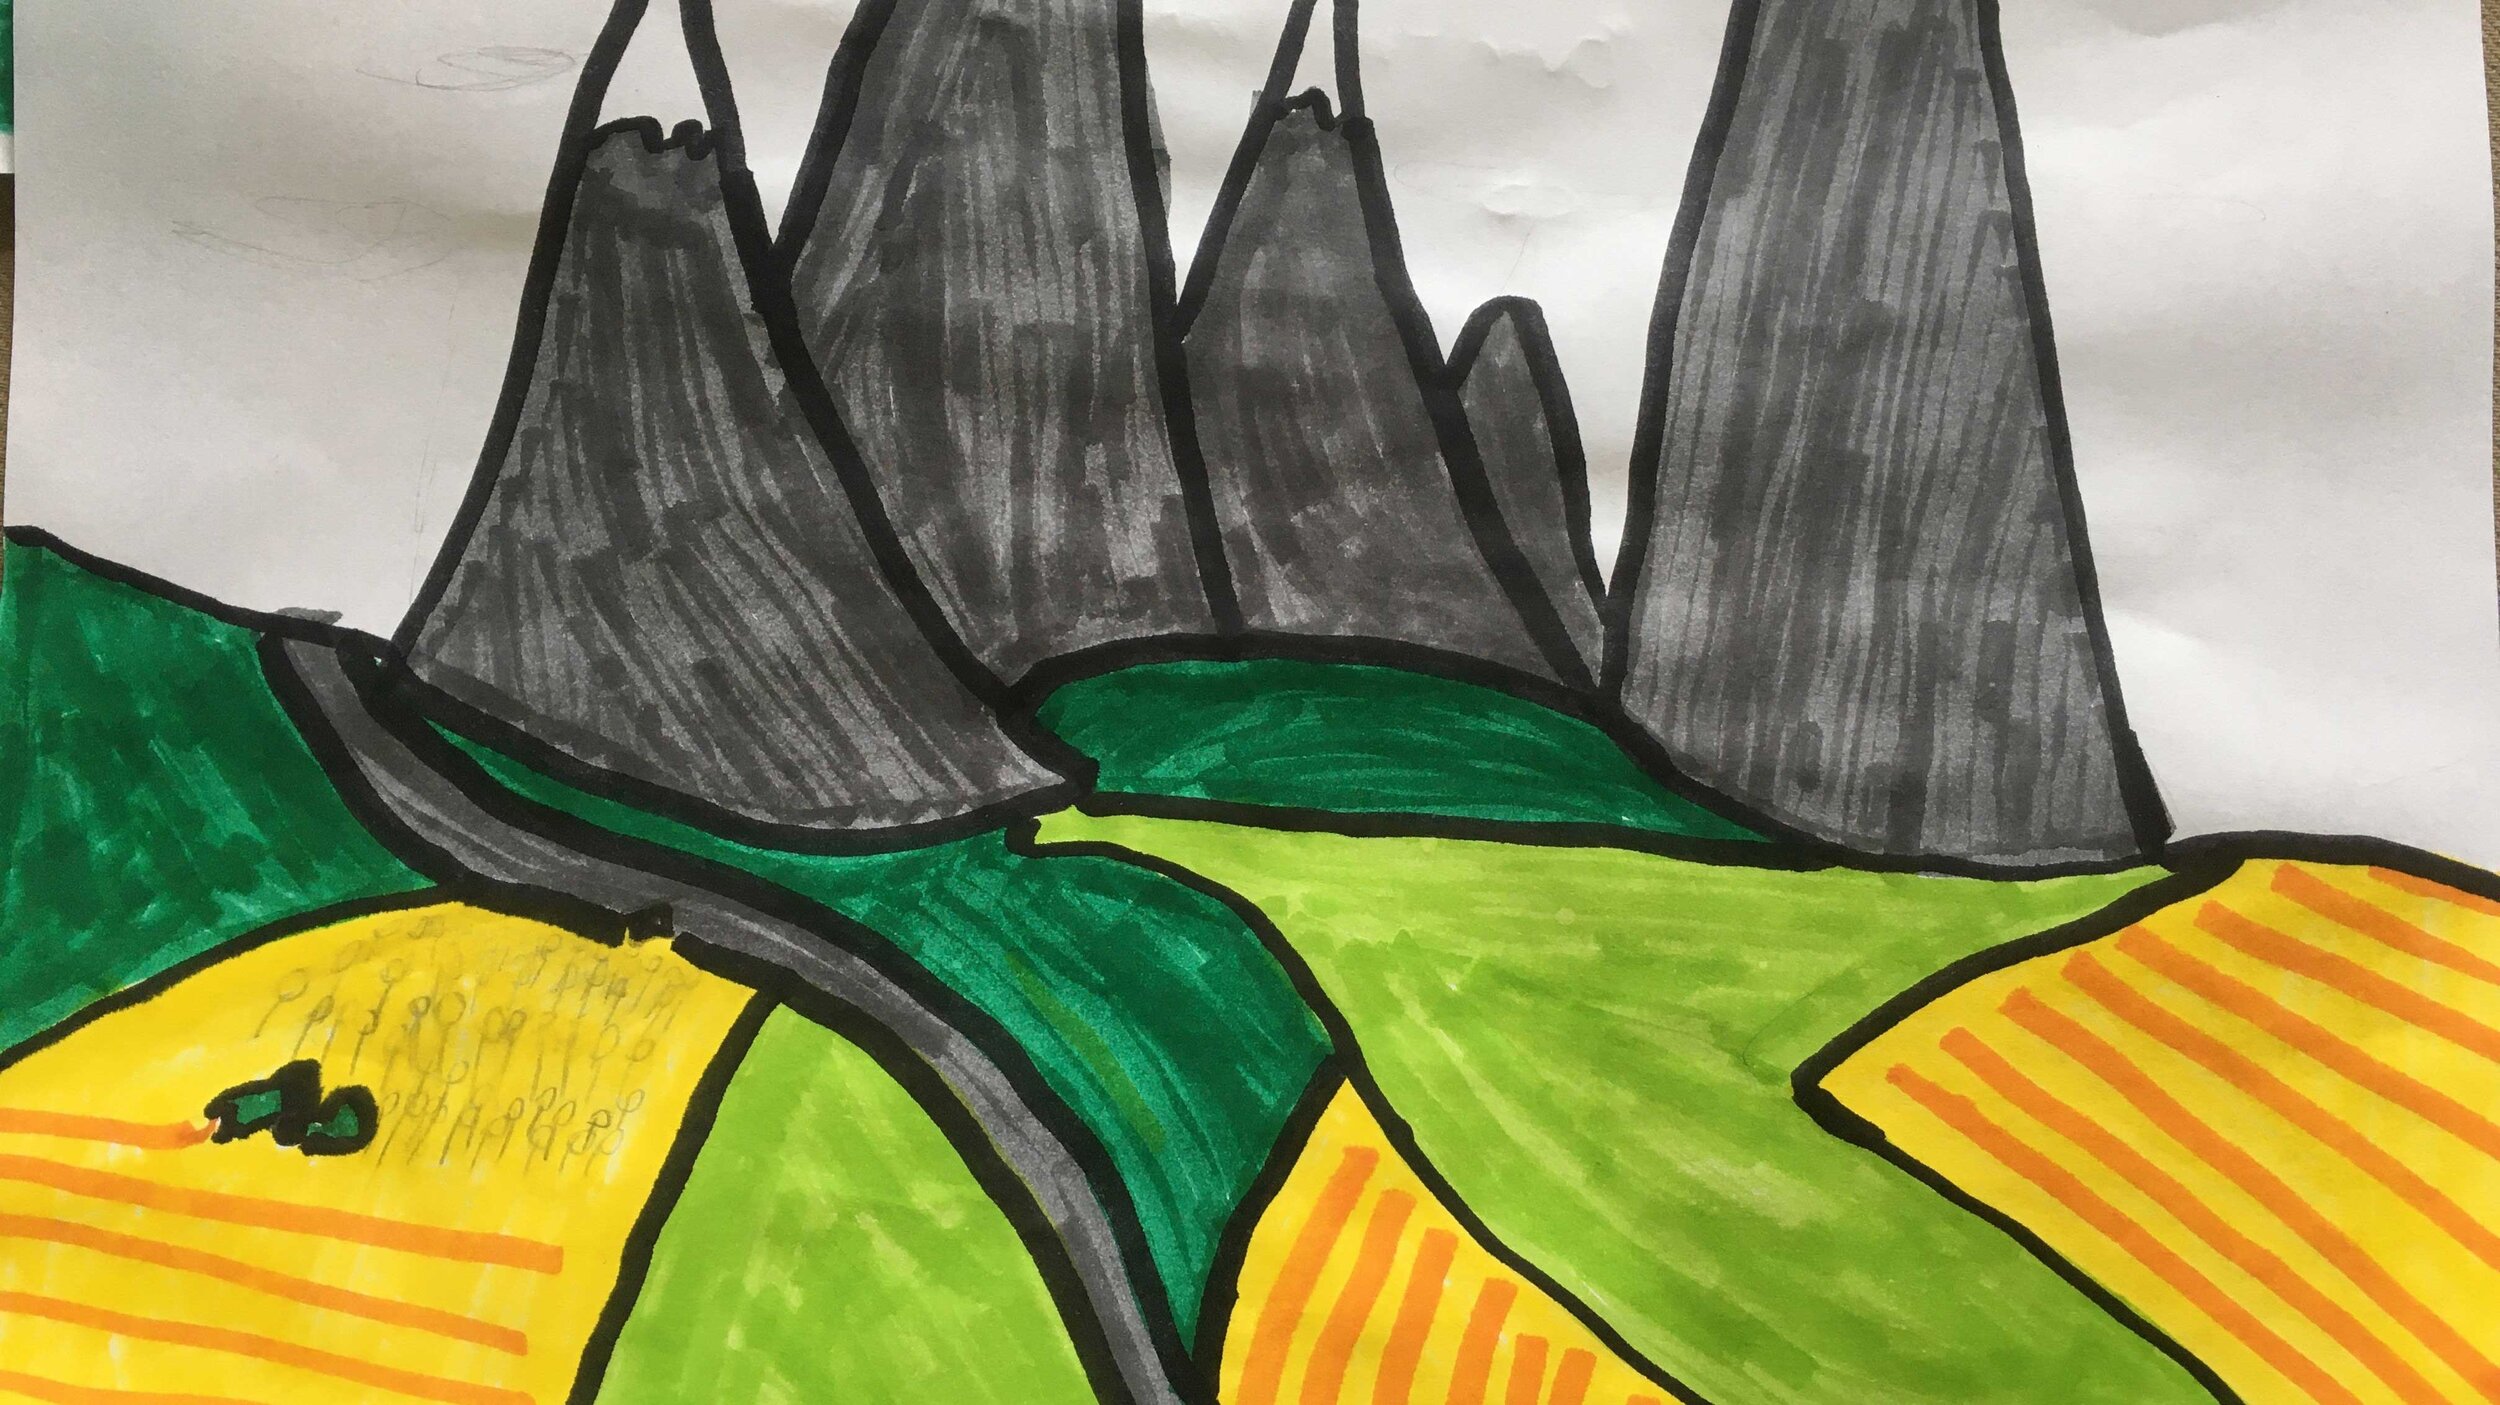 Over the mountain by Callum Parker age 10